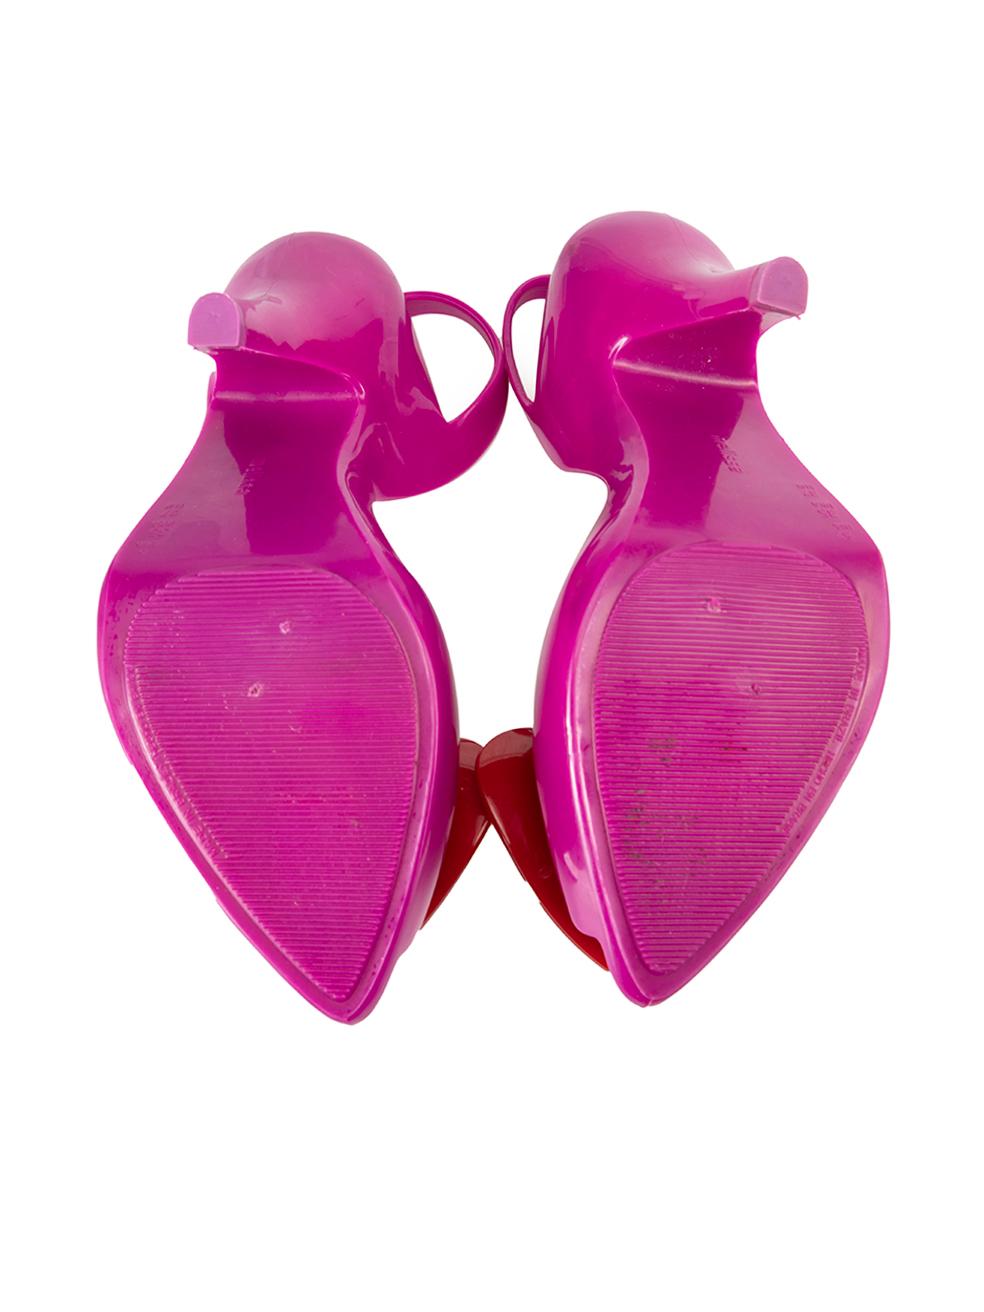 Vivienne Westwood Anglomania + Melissa Pink Heart Jelly Heels Size US 6 In Good Condition For Sale In London, GB